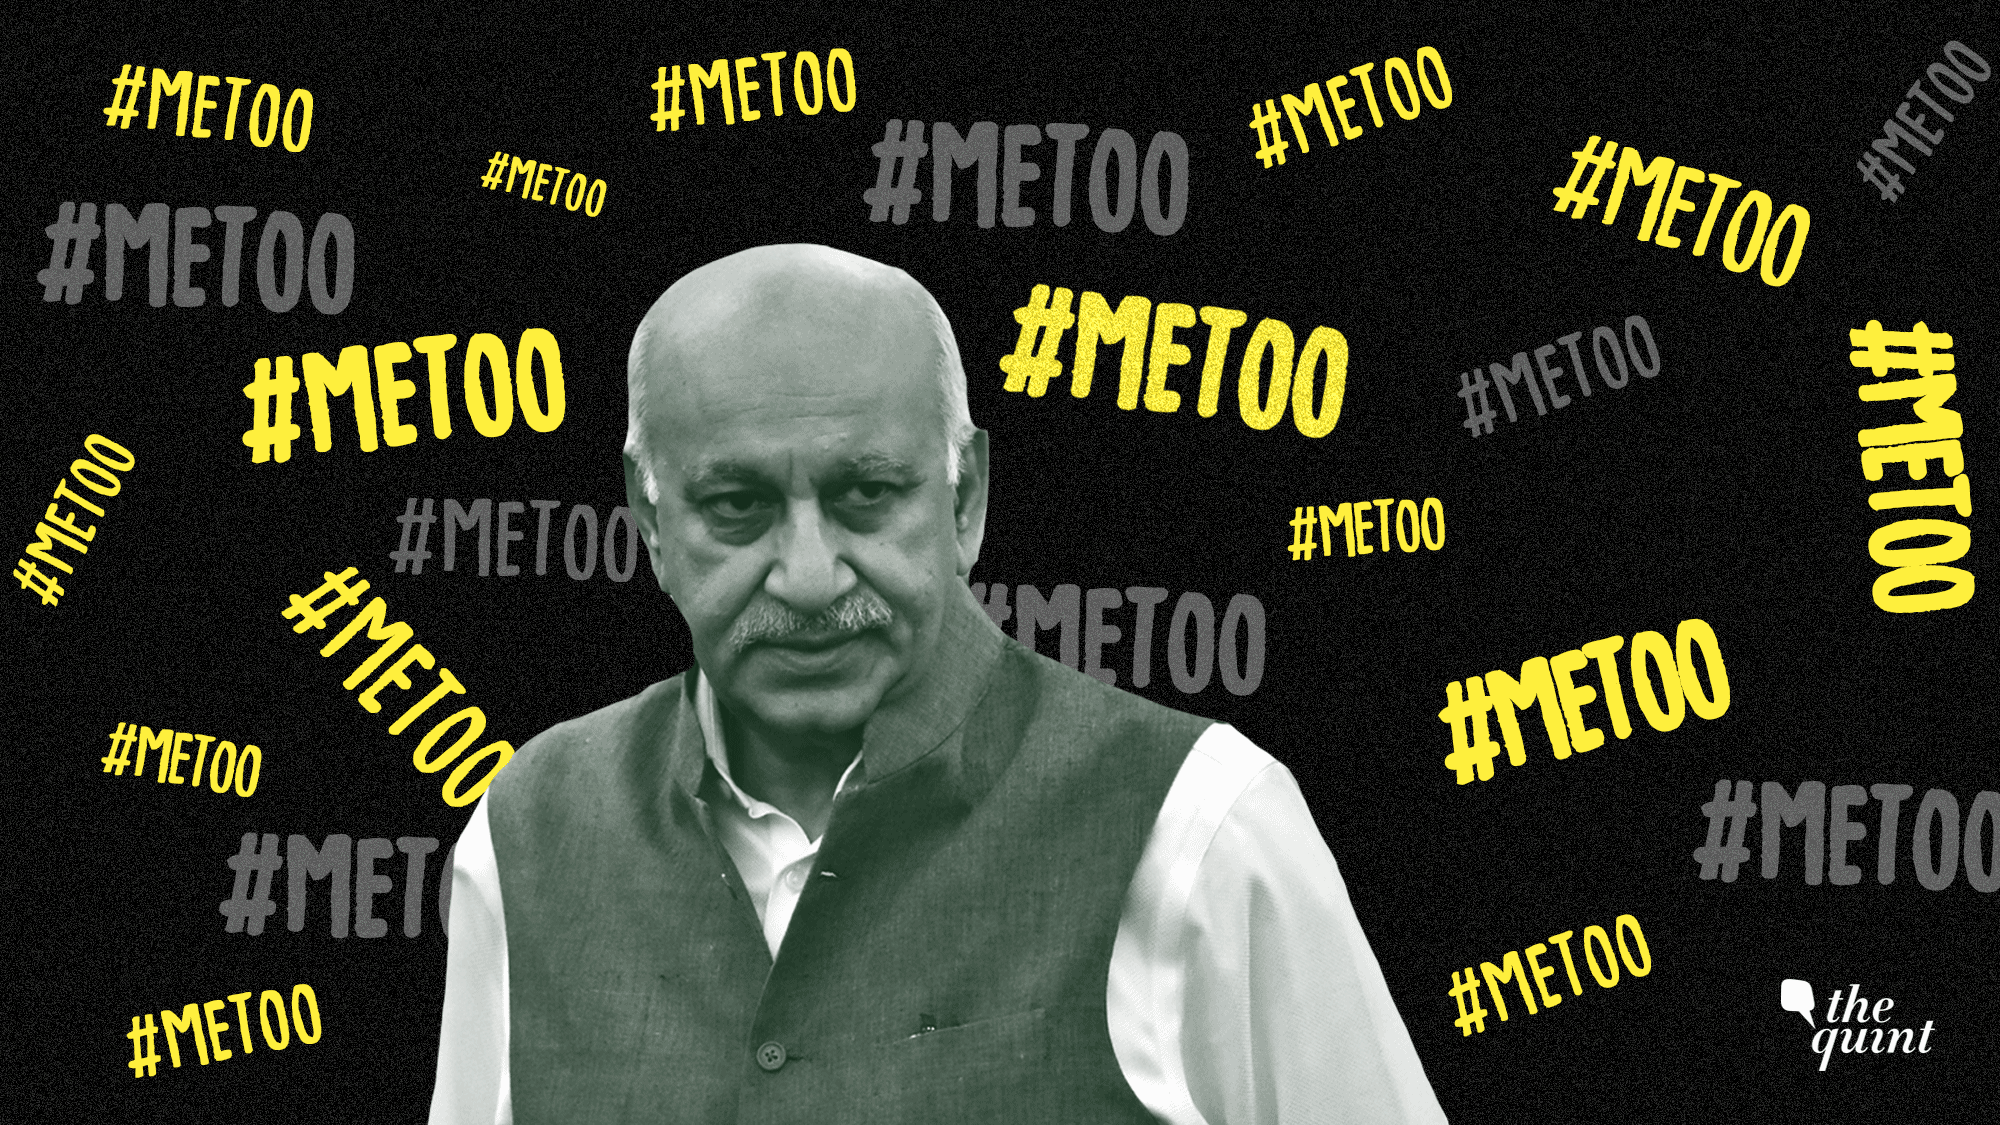 If a woman had walked into a newsroom run by MJ Akbar back in the 1990s, she would have been pleased.